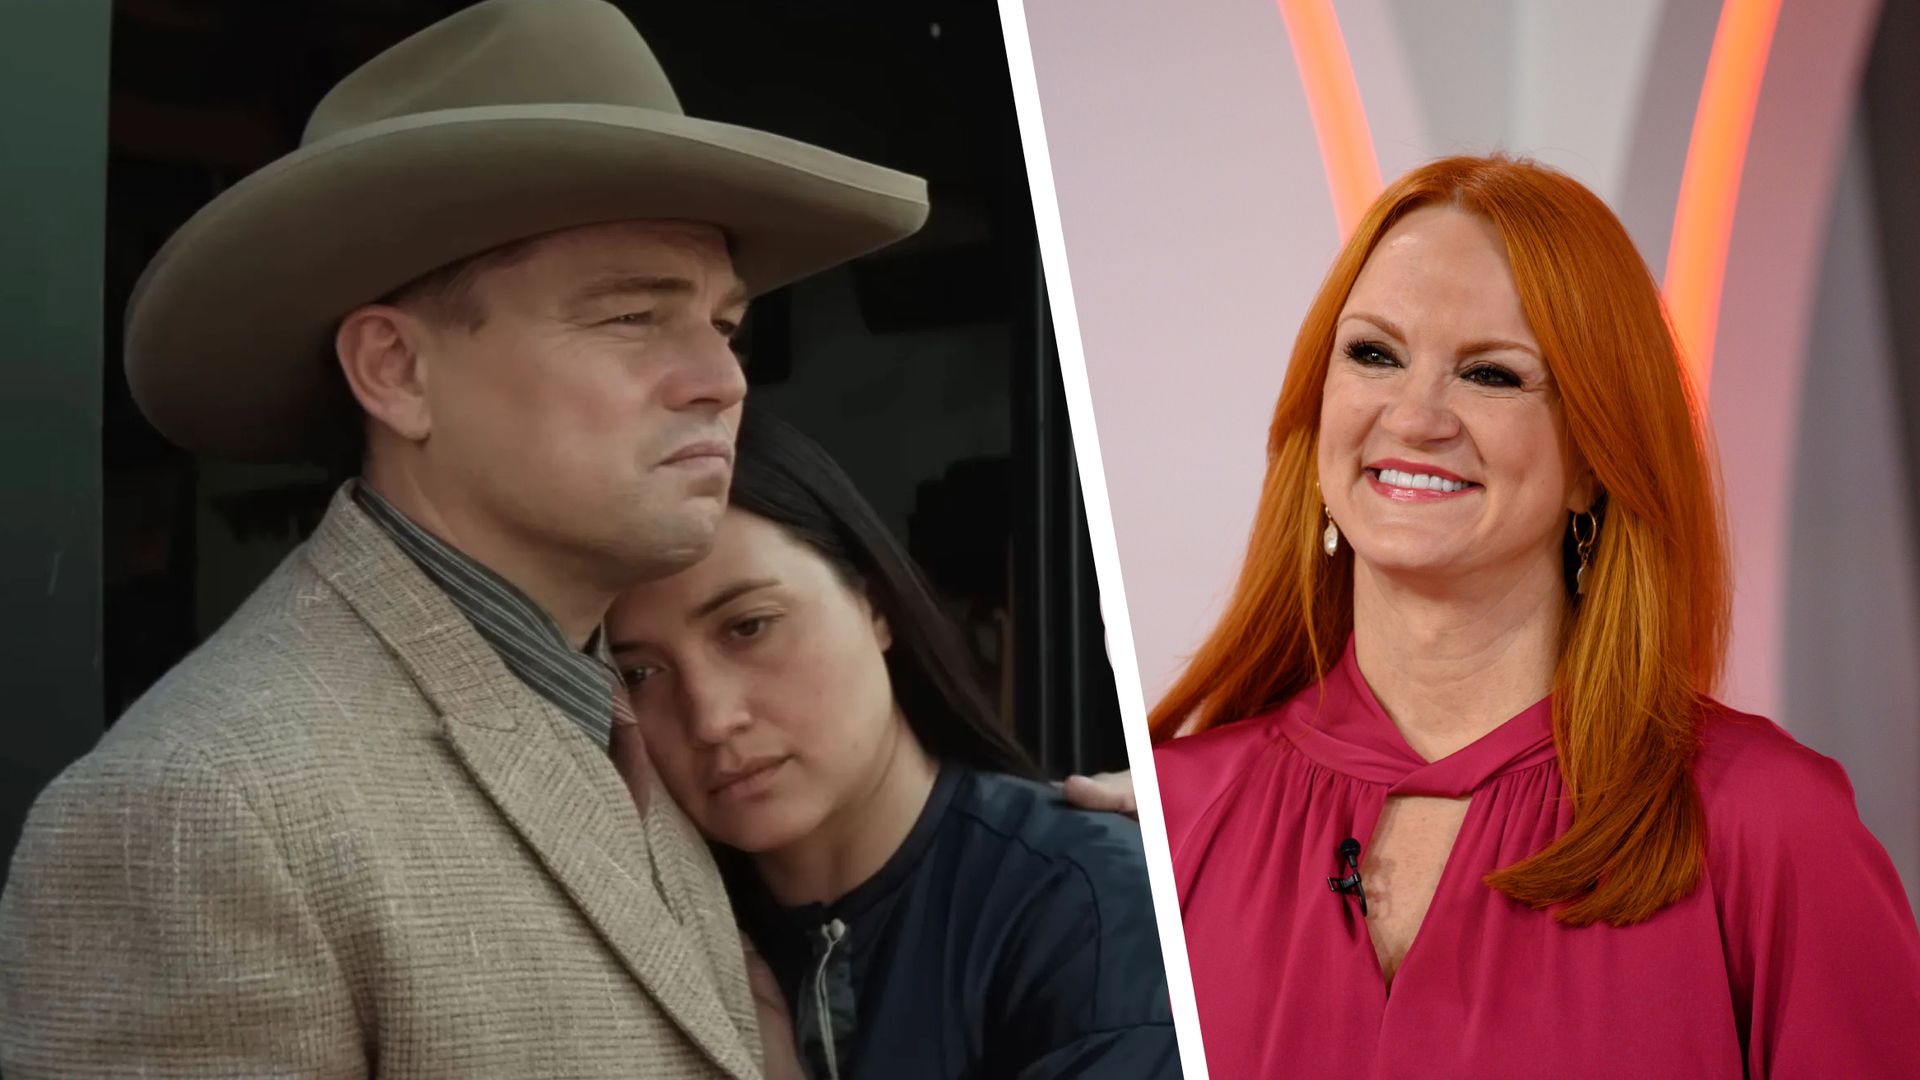 How Pioneer Woman's Ree Drummond and Leonardo DiCaprio's new film Killers of the Flower Moon are connected